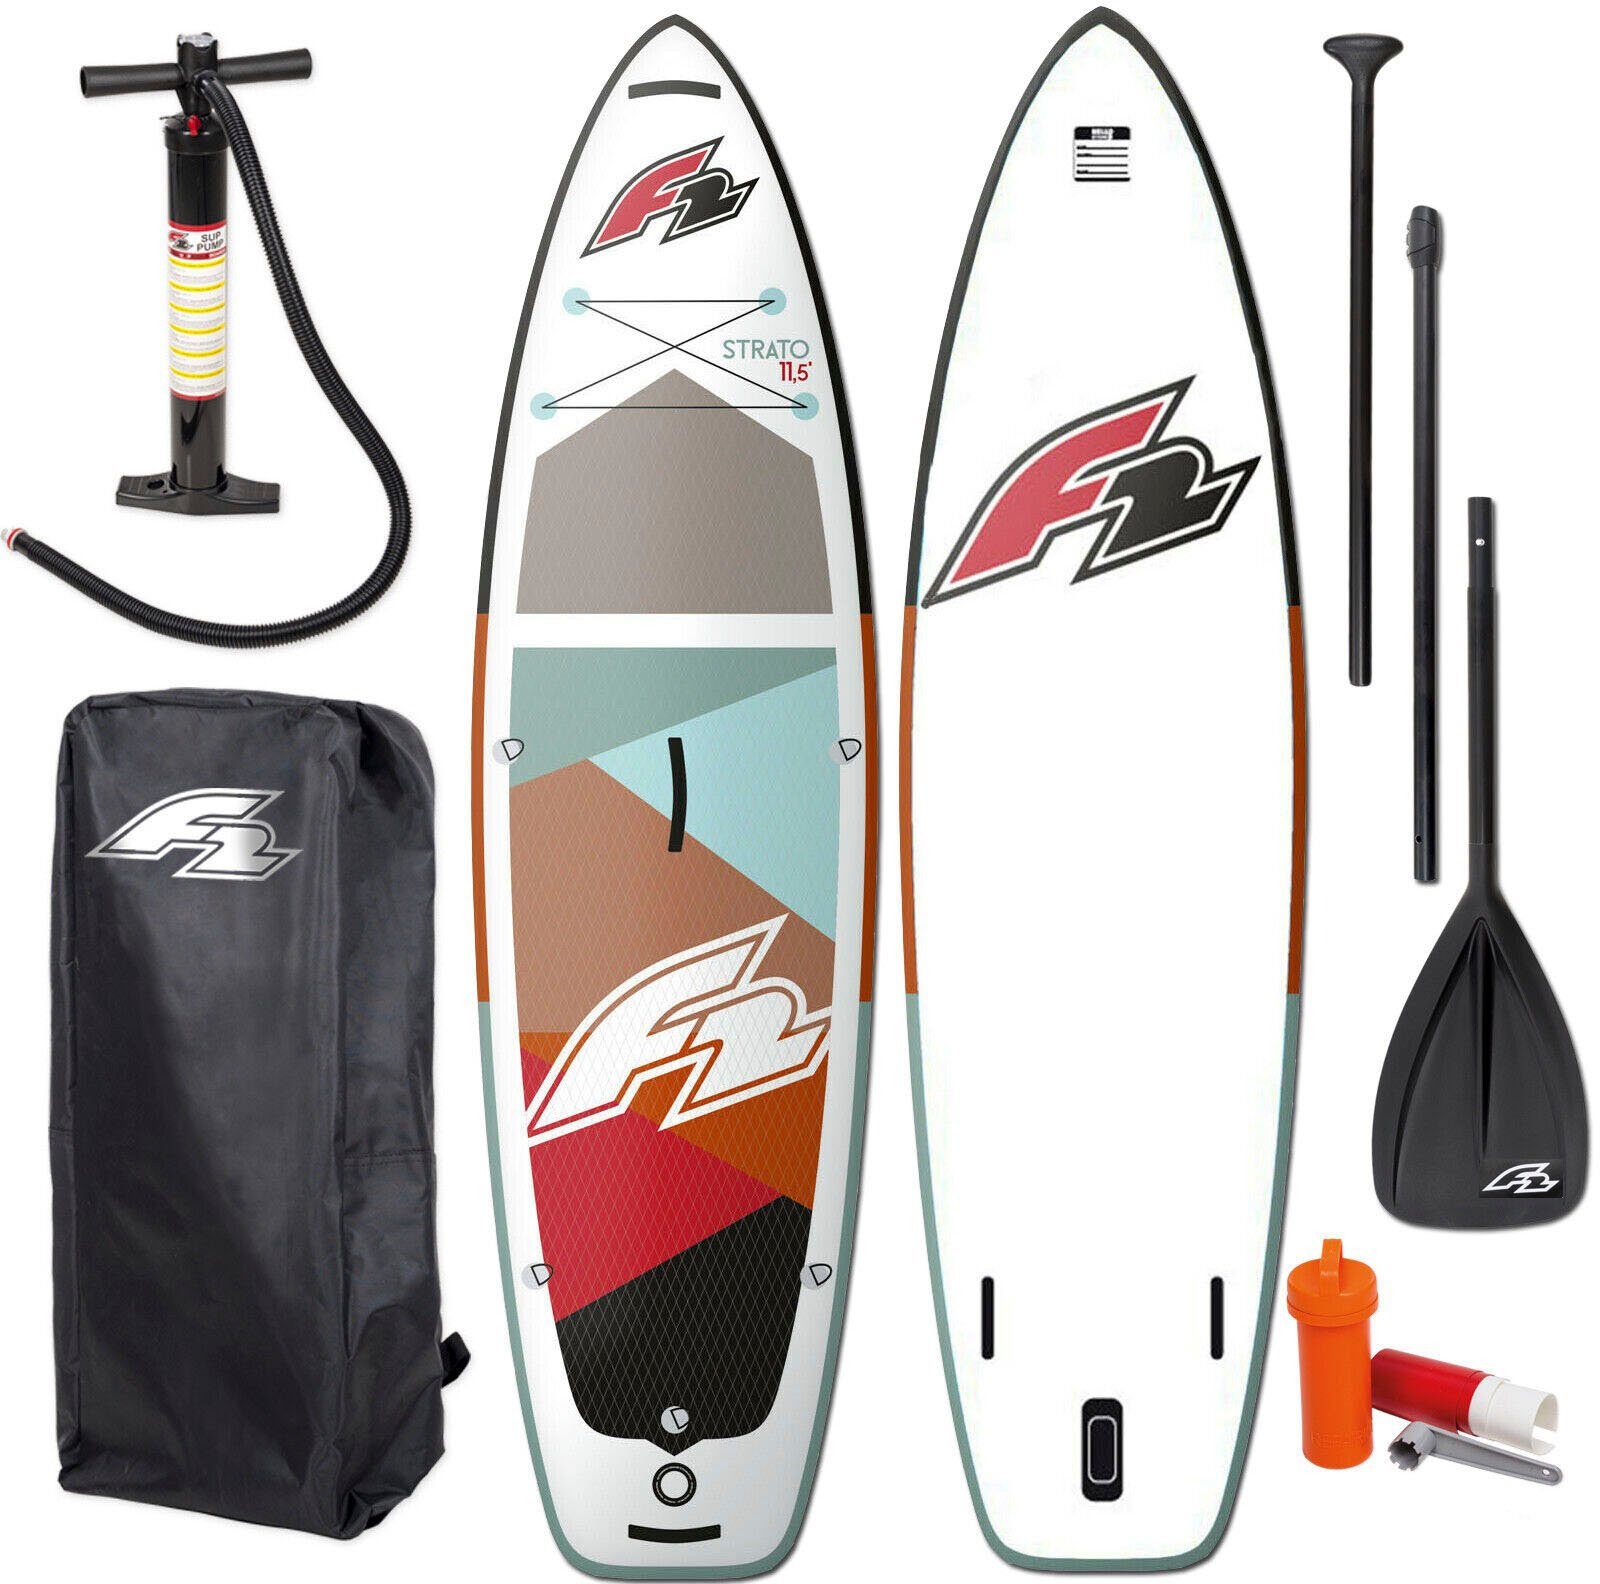 F2 Inflatable 10,5 5 SUP-Board Strato red, (Packung, tlg) women